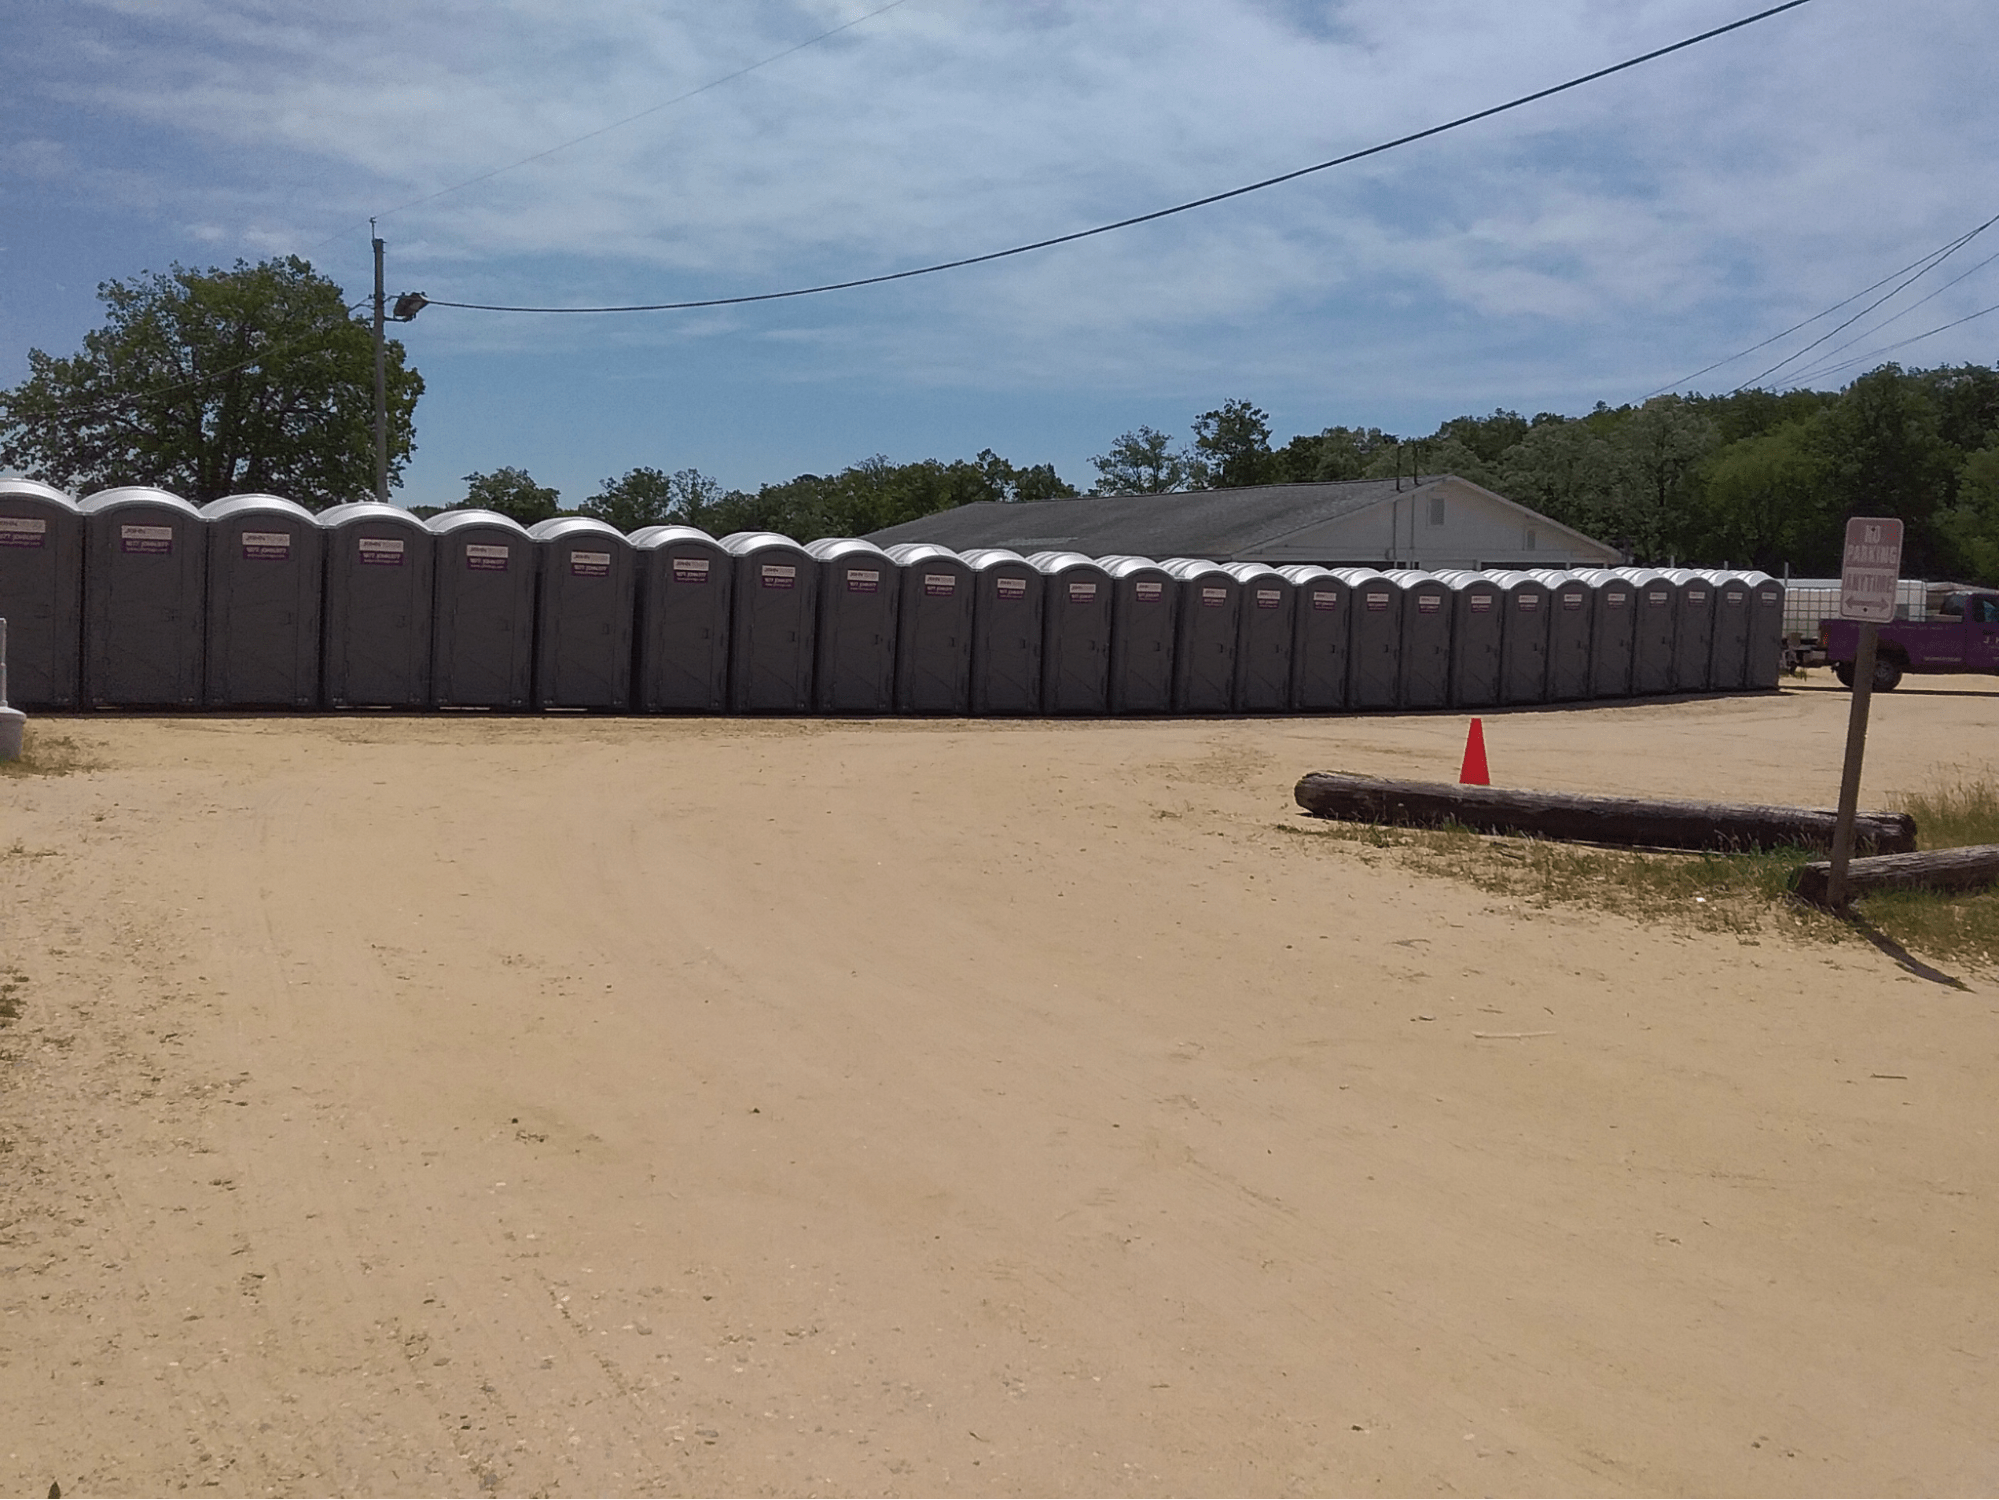 a slew of temporary portable toilets at a construction site